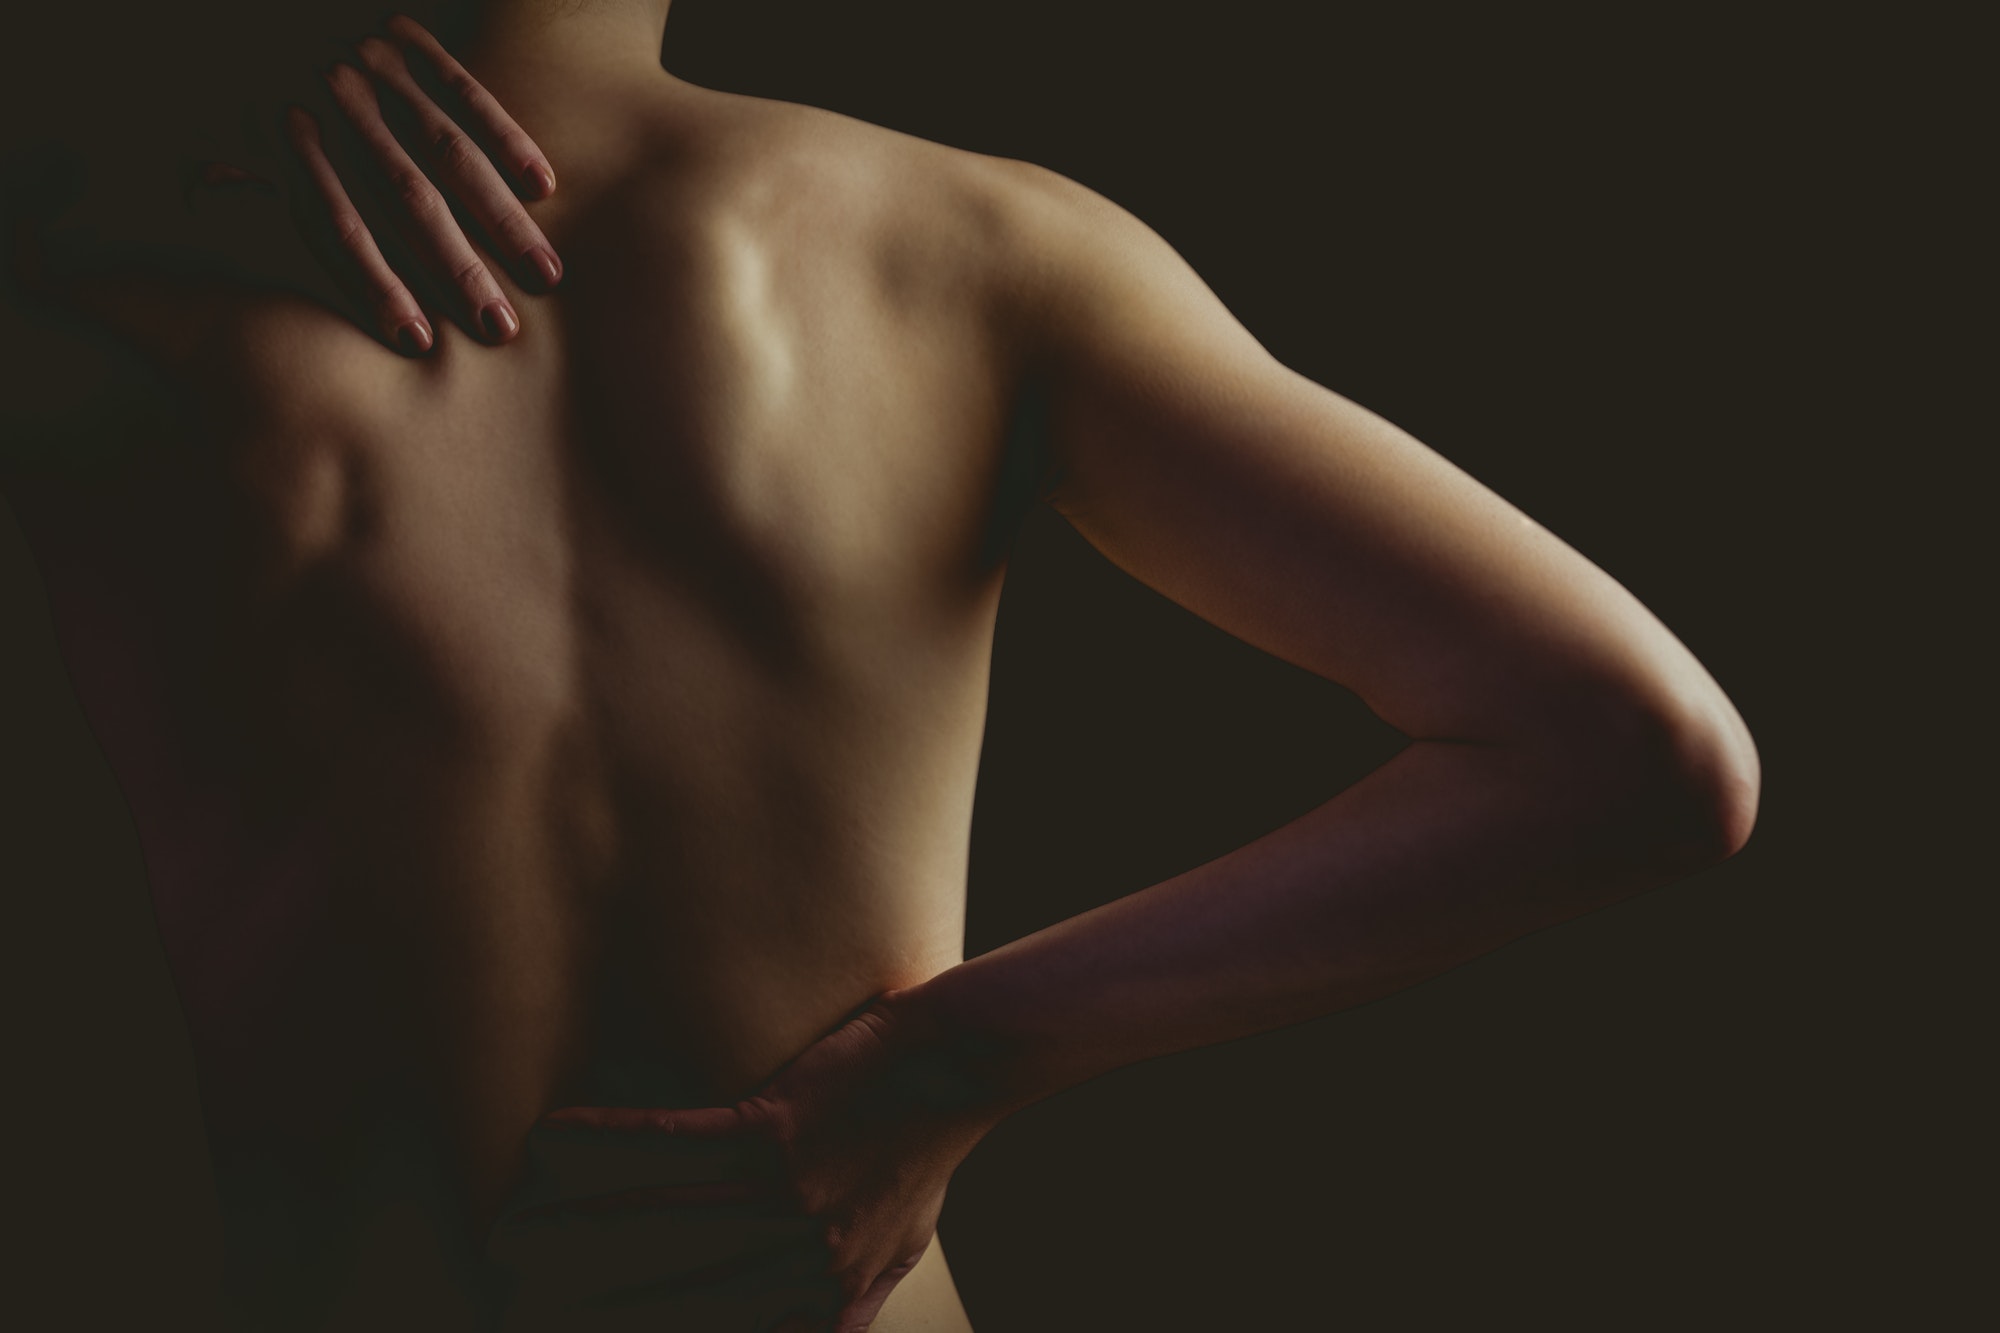 Nude woman with a back injury on black background